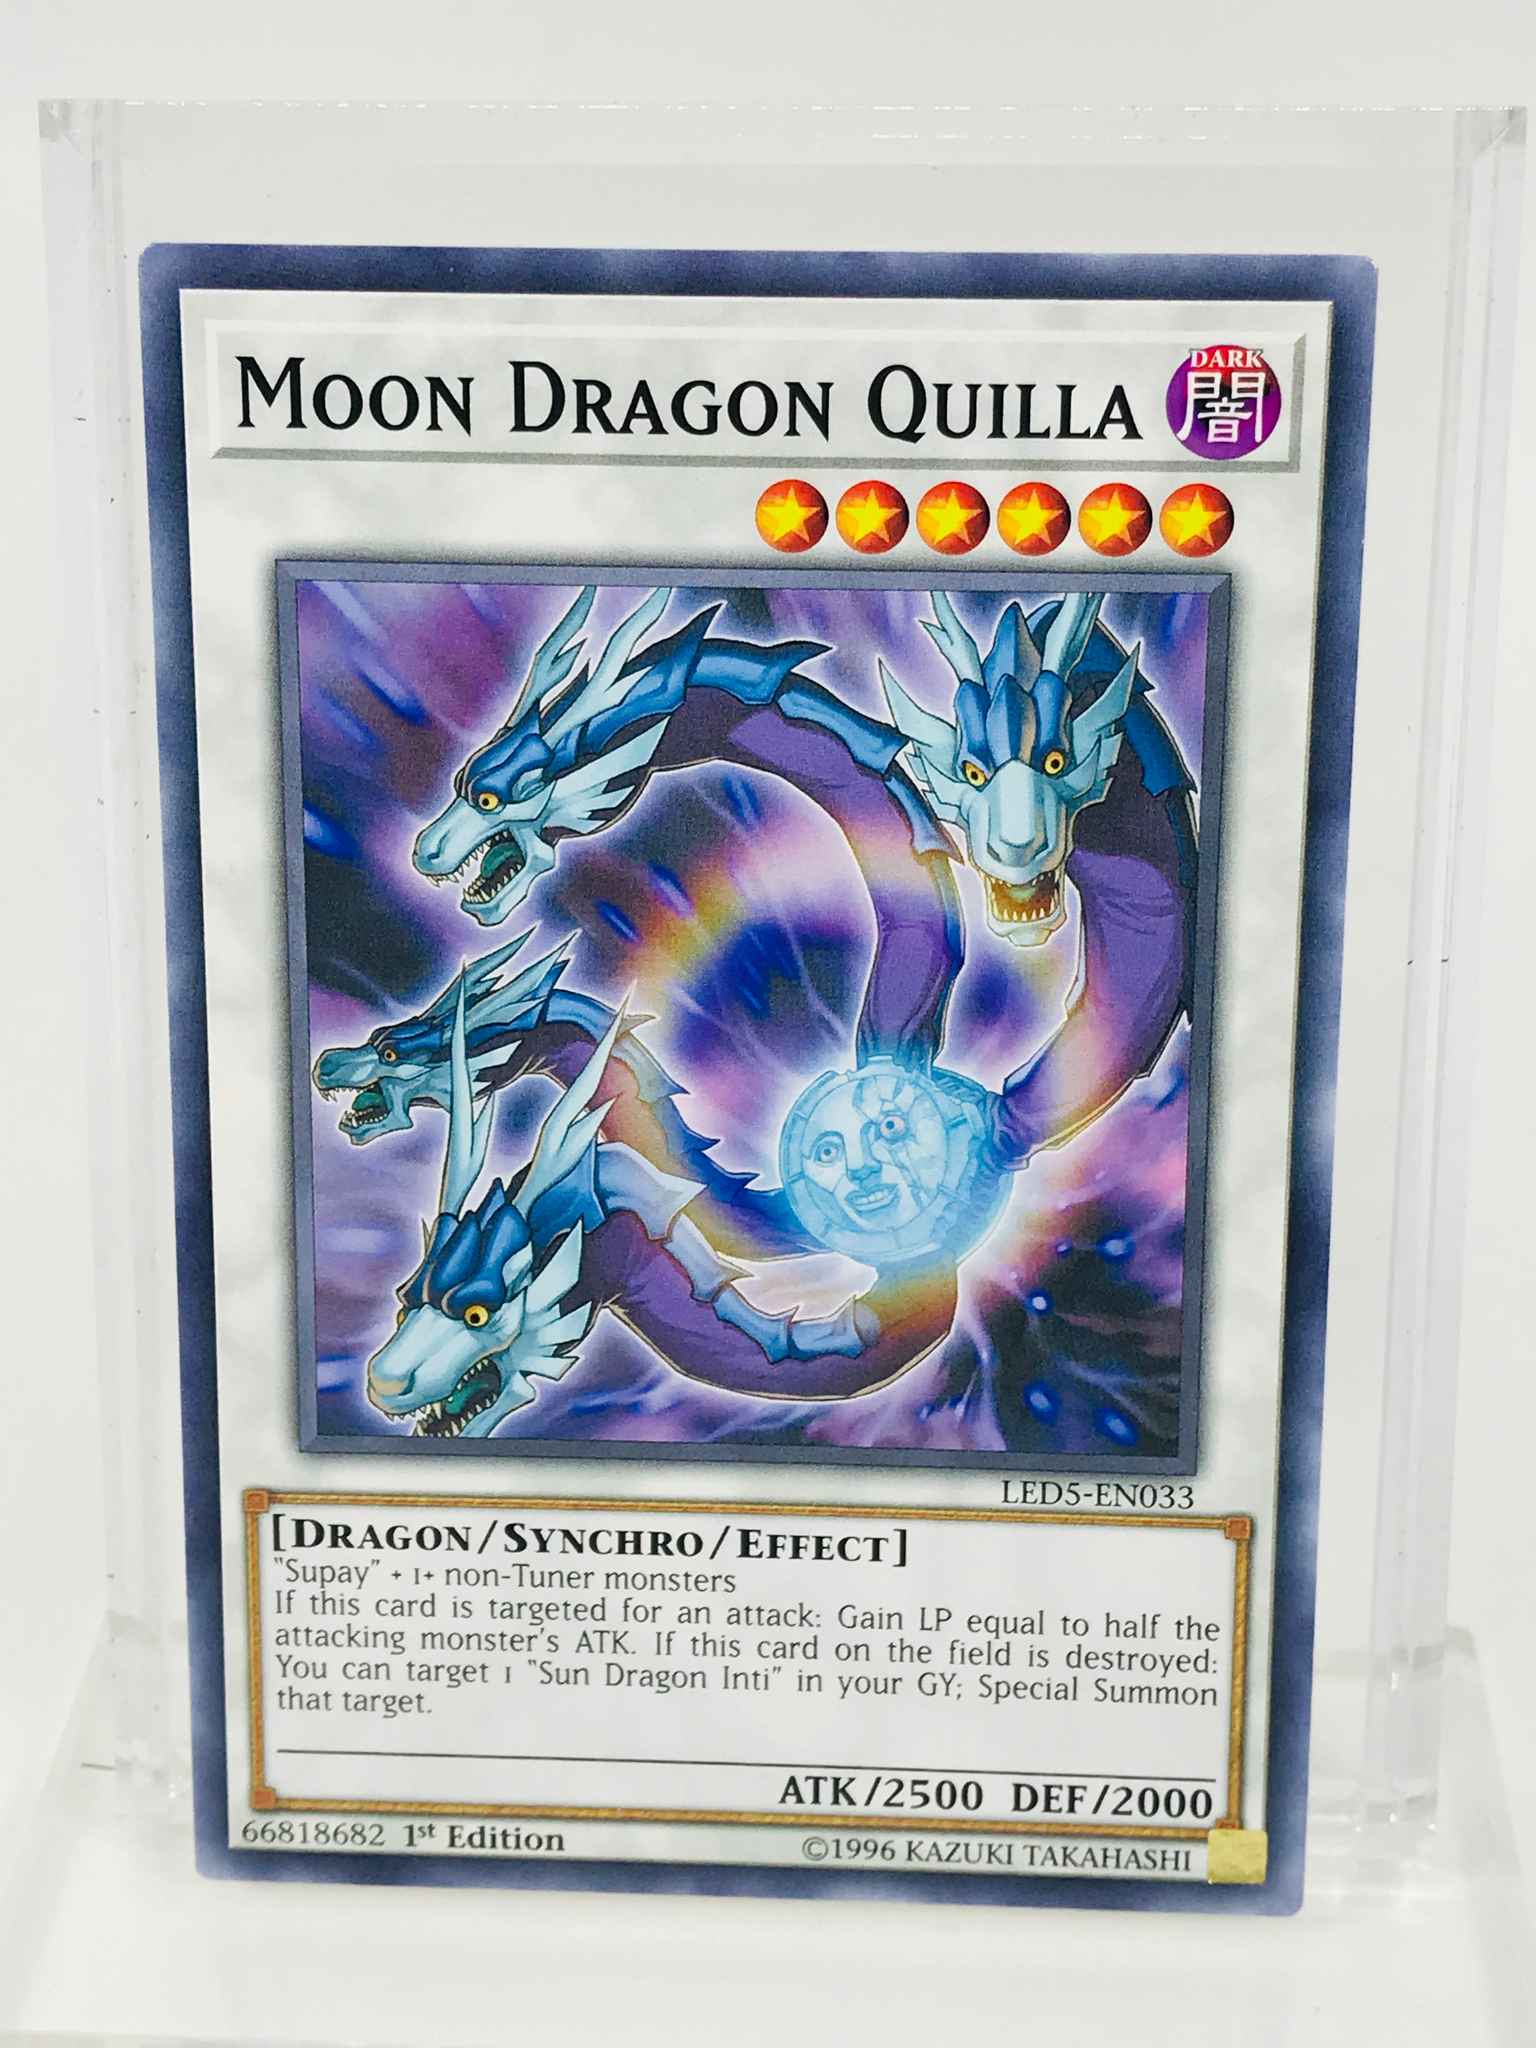 Moon Dragon Quilla Moon Dragon Quilla Legendary Duelists Immortal Destiny Yugioh Online Gaming Store For Cards Miniatures Singles Packs Booster Boxes